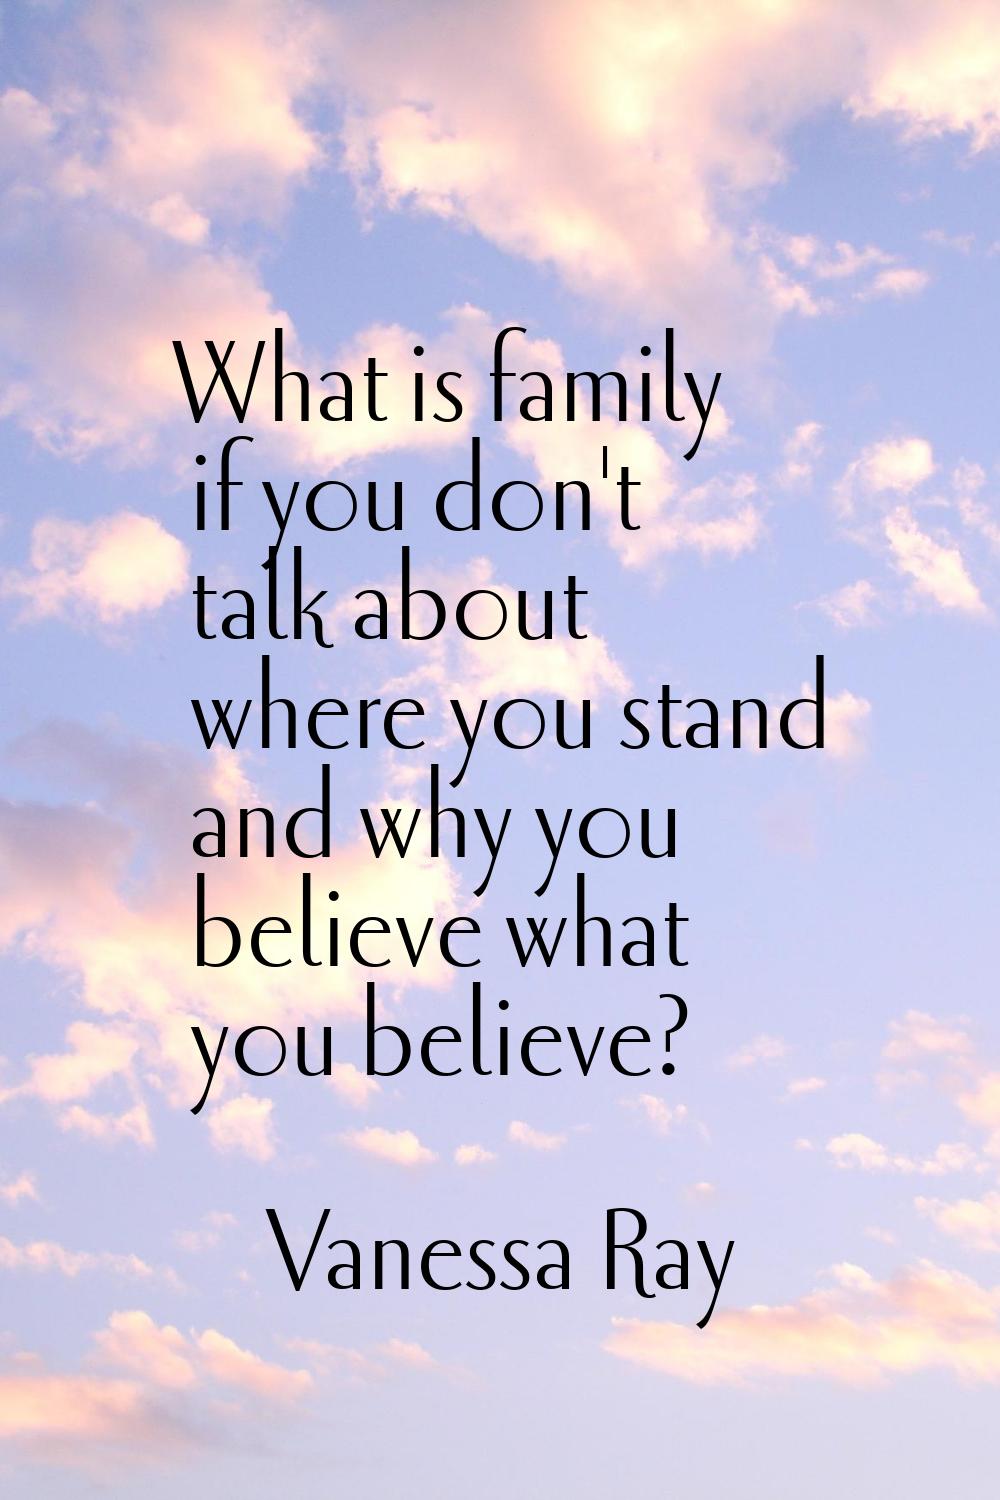 What is family if you don't talk about where you stand and why you believe what you believe?